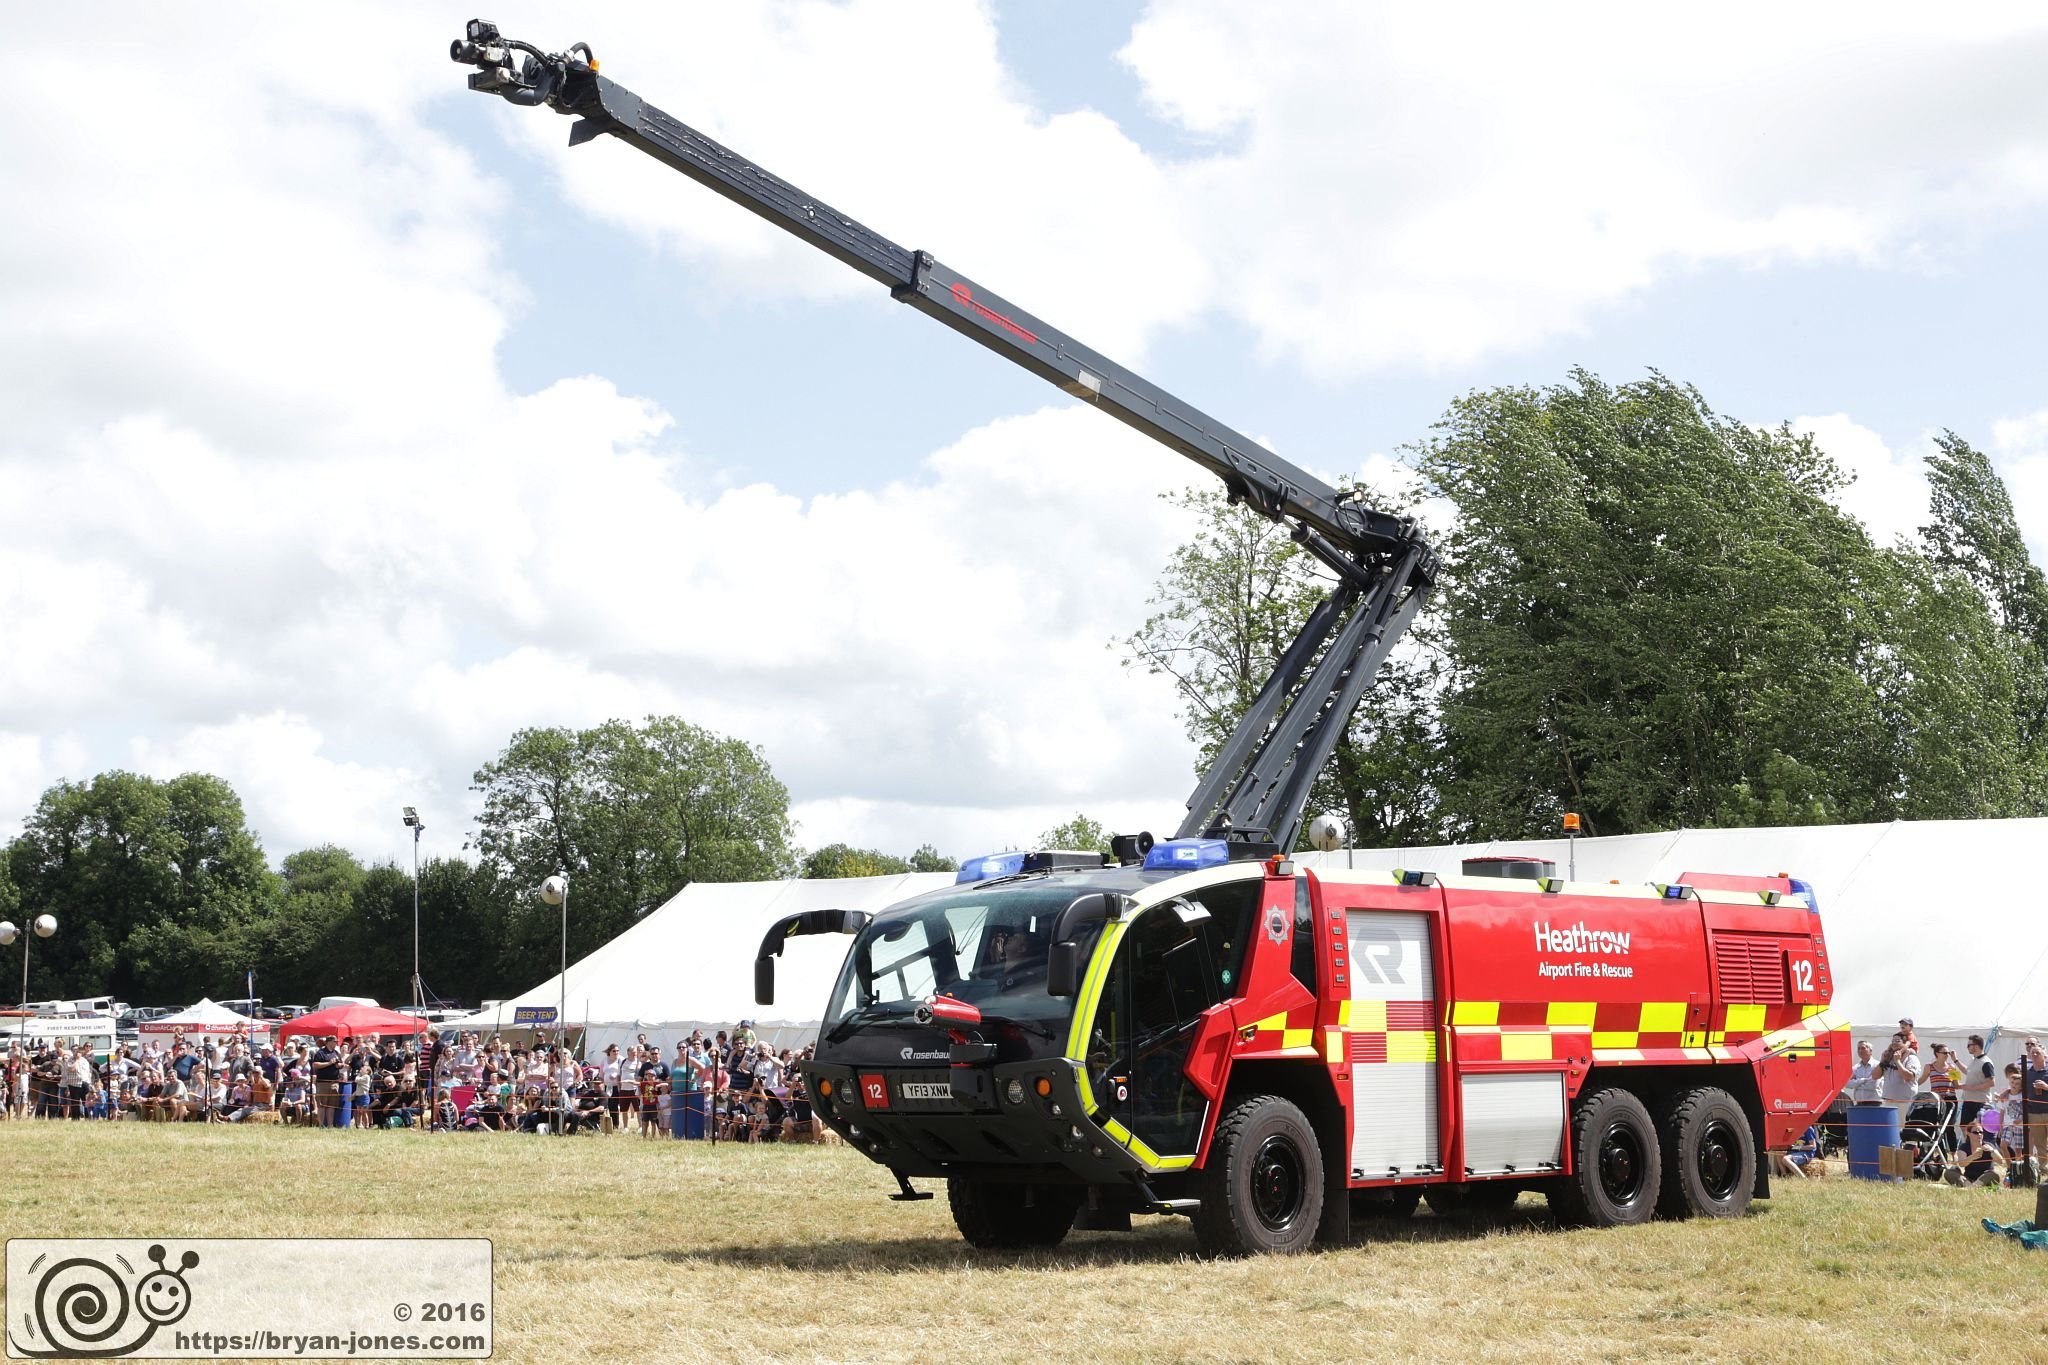 2016 Odiham Fire Show 07-Aug-2016. Heathrow Airport Fire and Rescue Rosenbauer Panther Airfield Rescuee Firefighting (ARFF) crash tender fire appliance with Stinger. YF13XNM